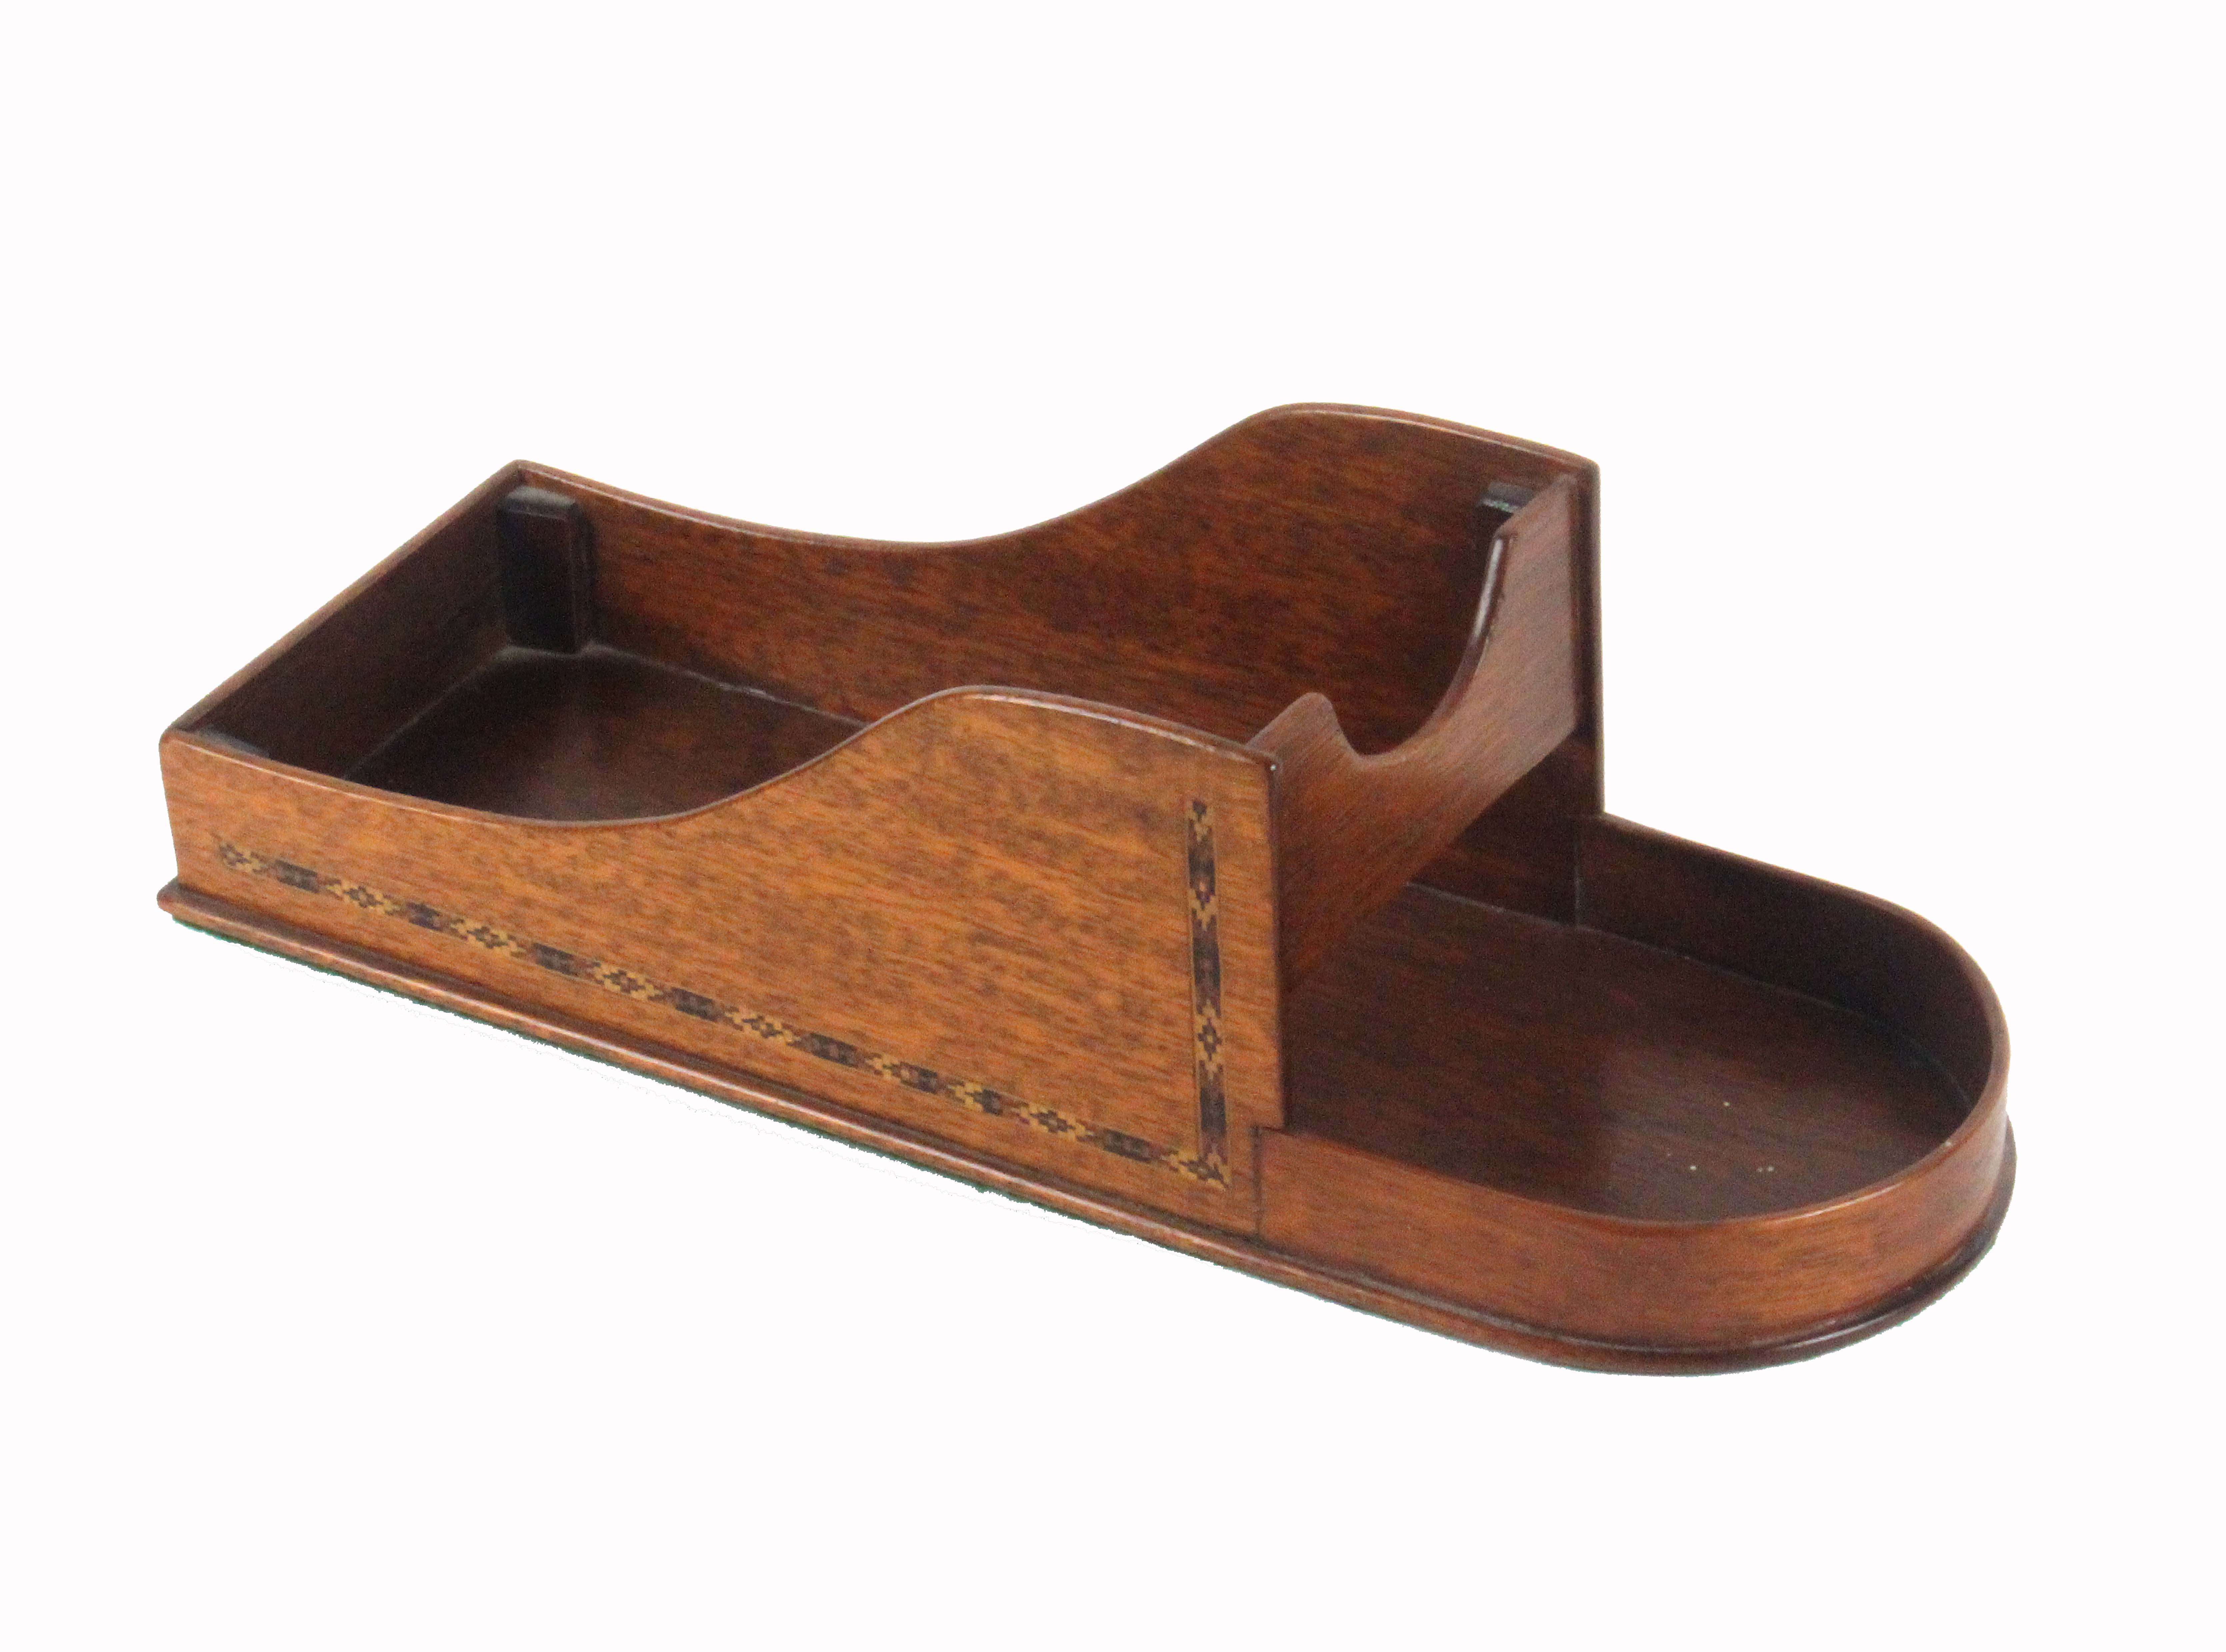 A late Tunbridge ware mahogany wine bottle cradle, the sides inset with bands of narrow geometric